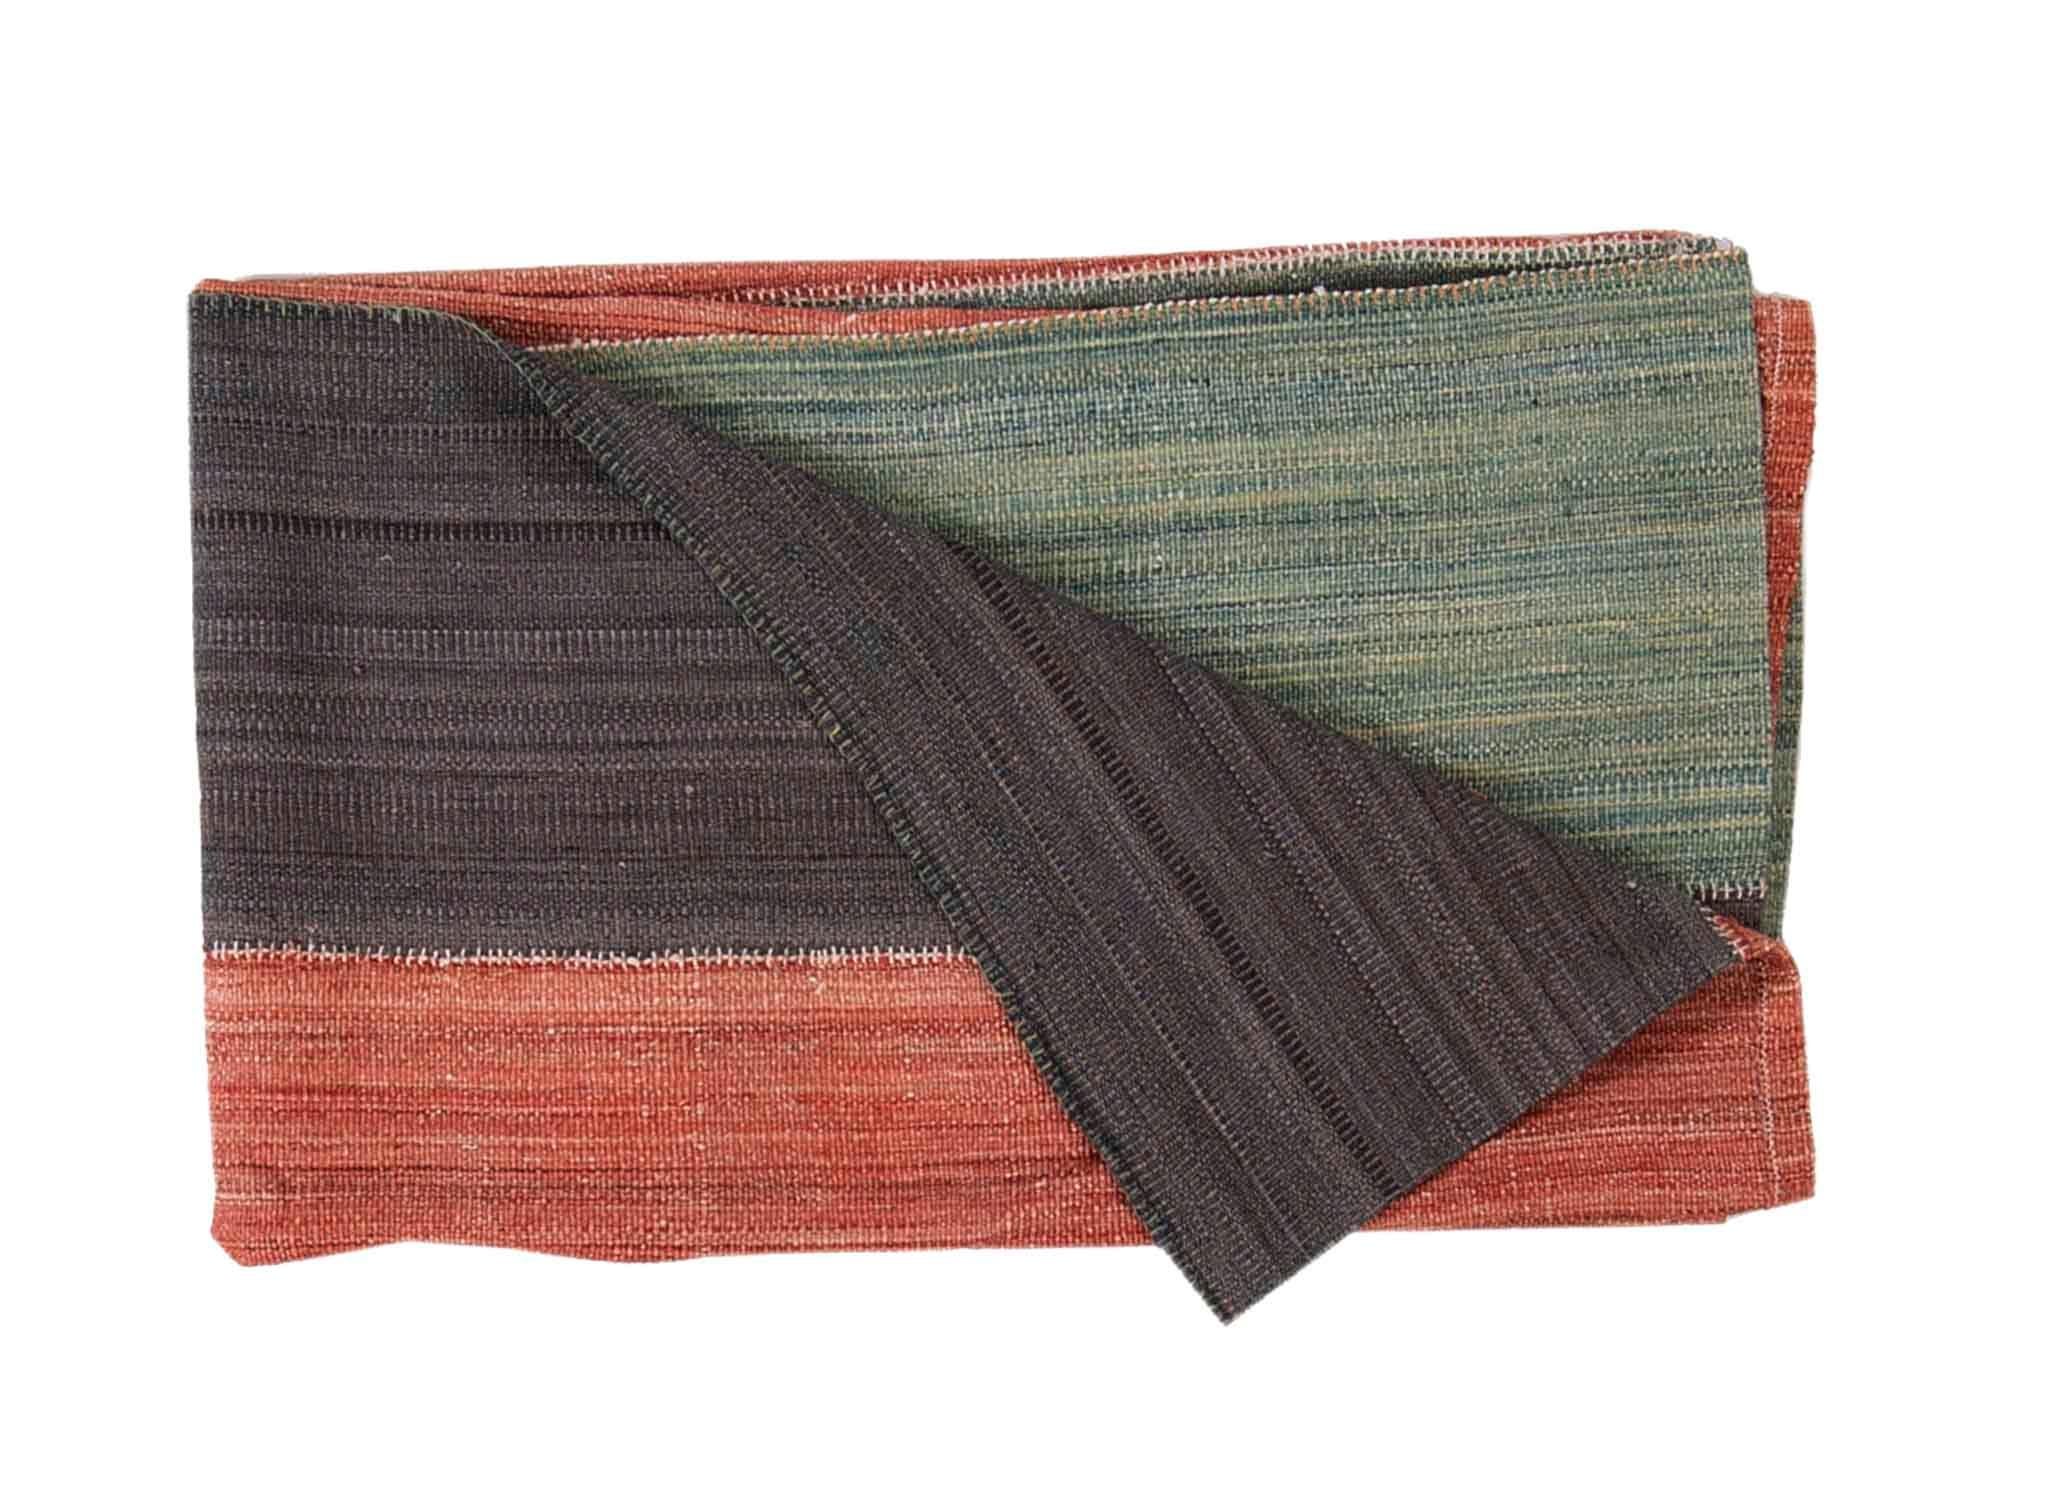 Modern Turkish Kilim Rug in Black, Red and Green Flat-Weave Stripes Pattern In New Condition For Sale In Dallas, TX